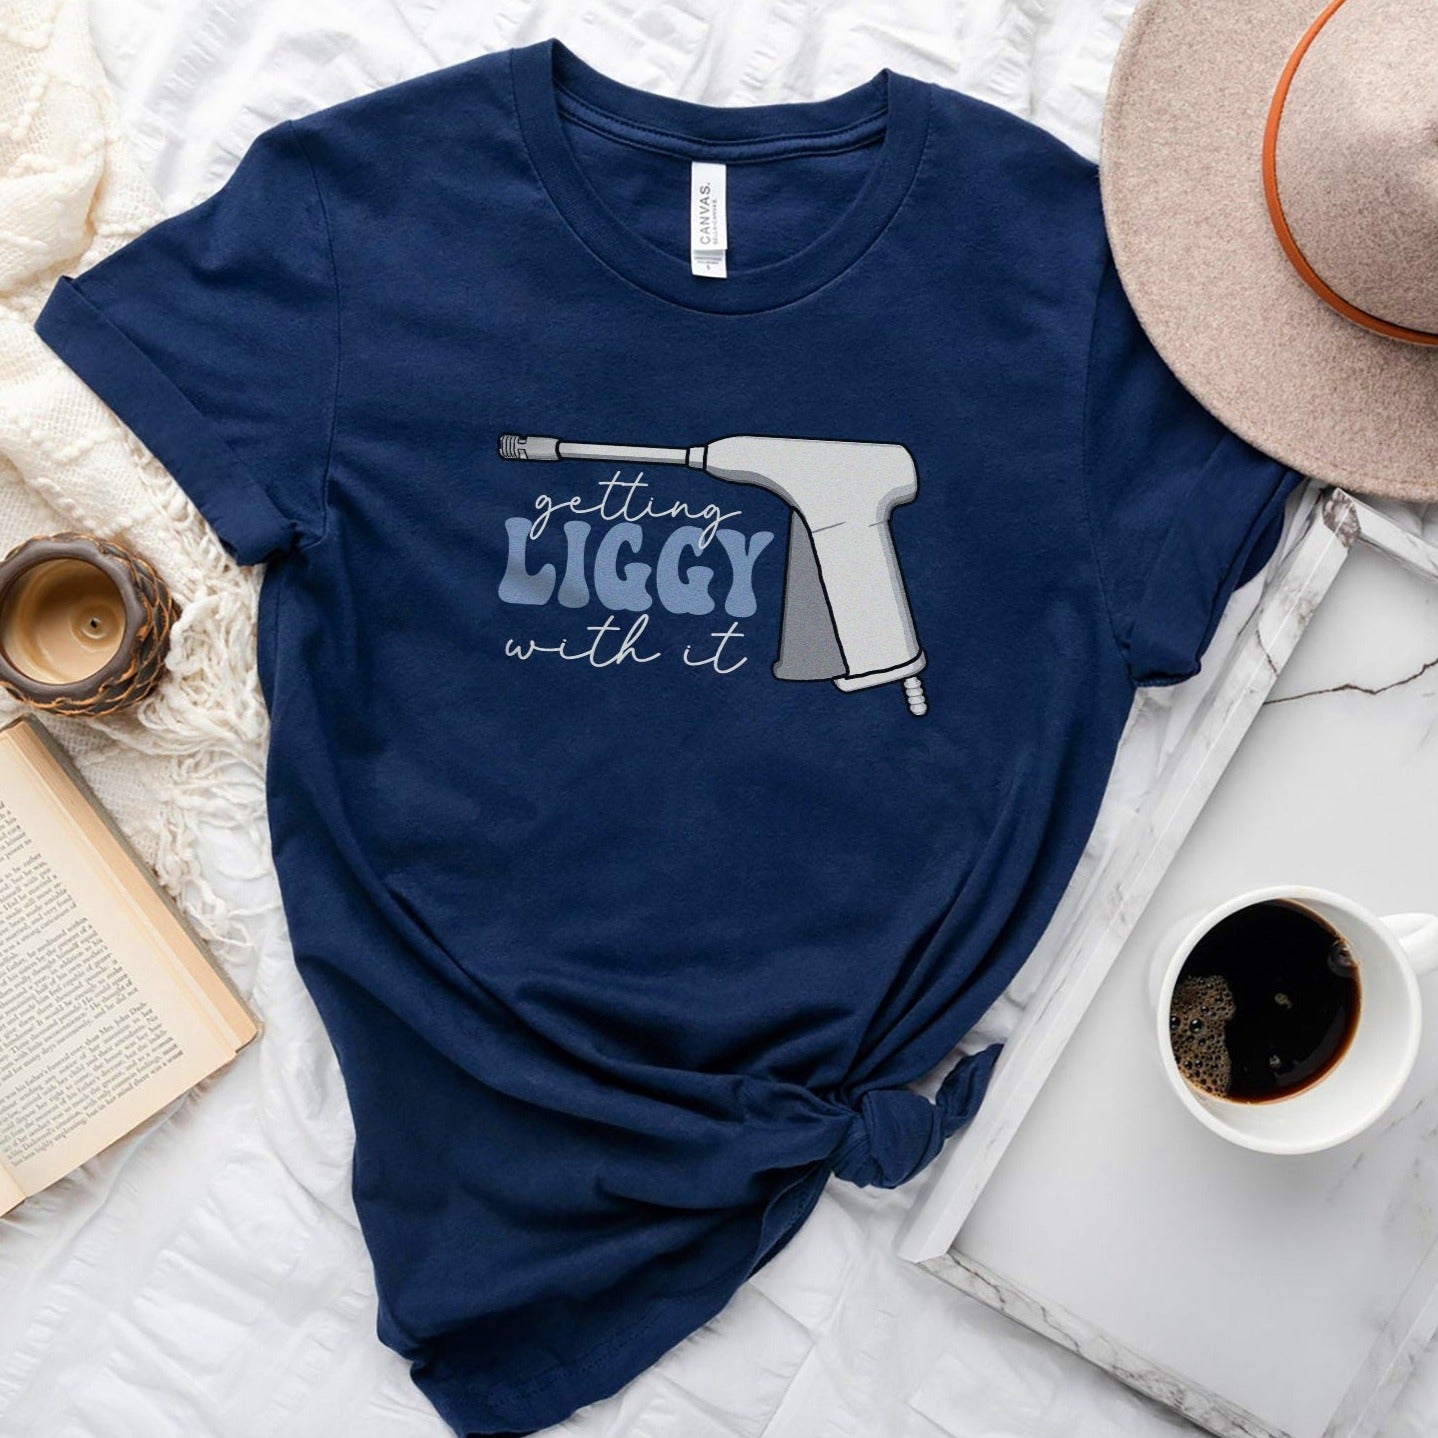 Getting Liggy With It T-Shirt